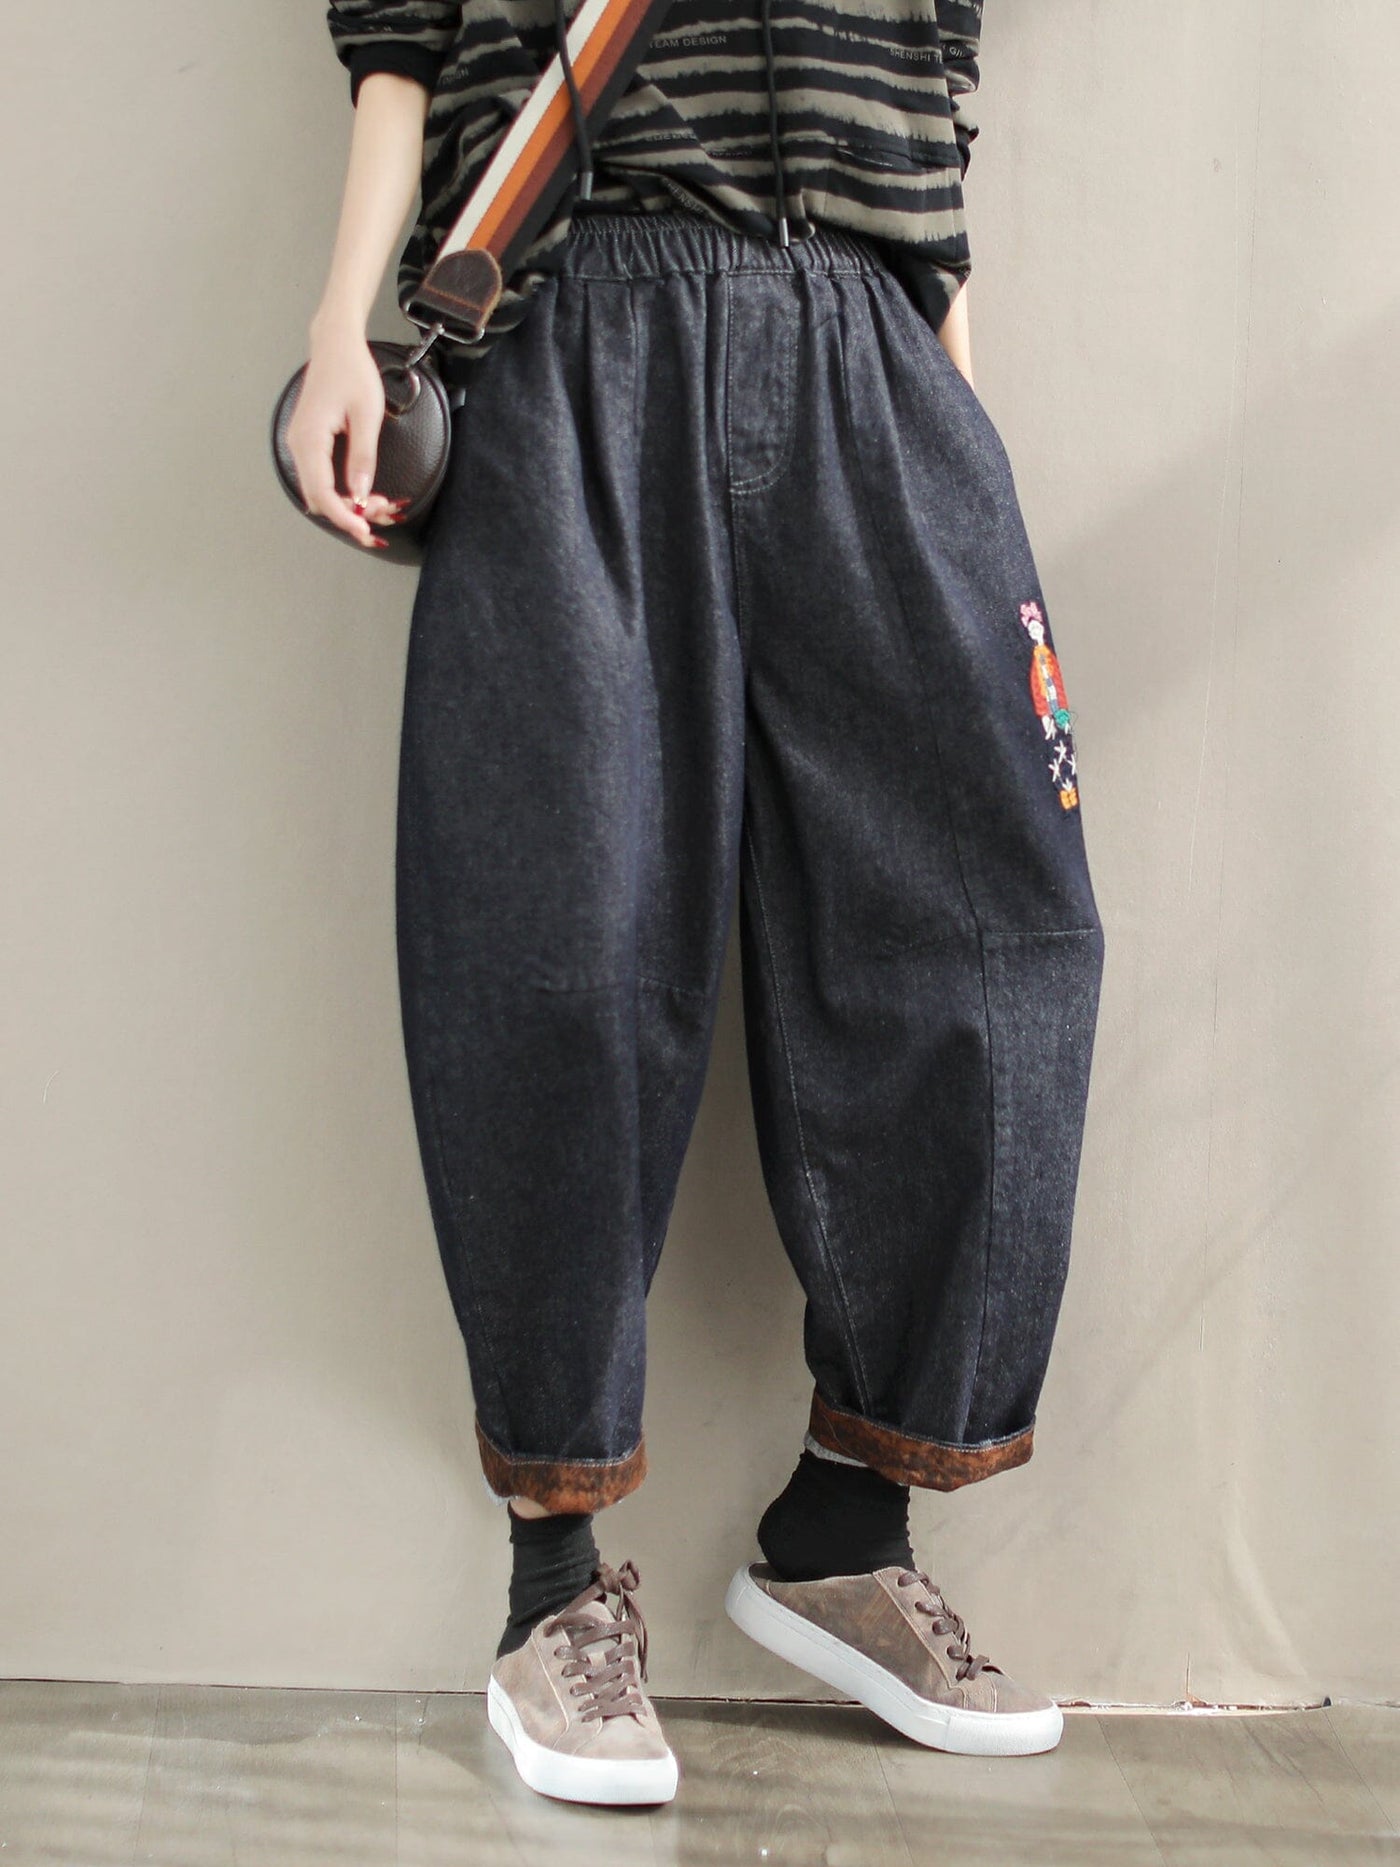 Women Spring Embroidery Loose Harem Jeans